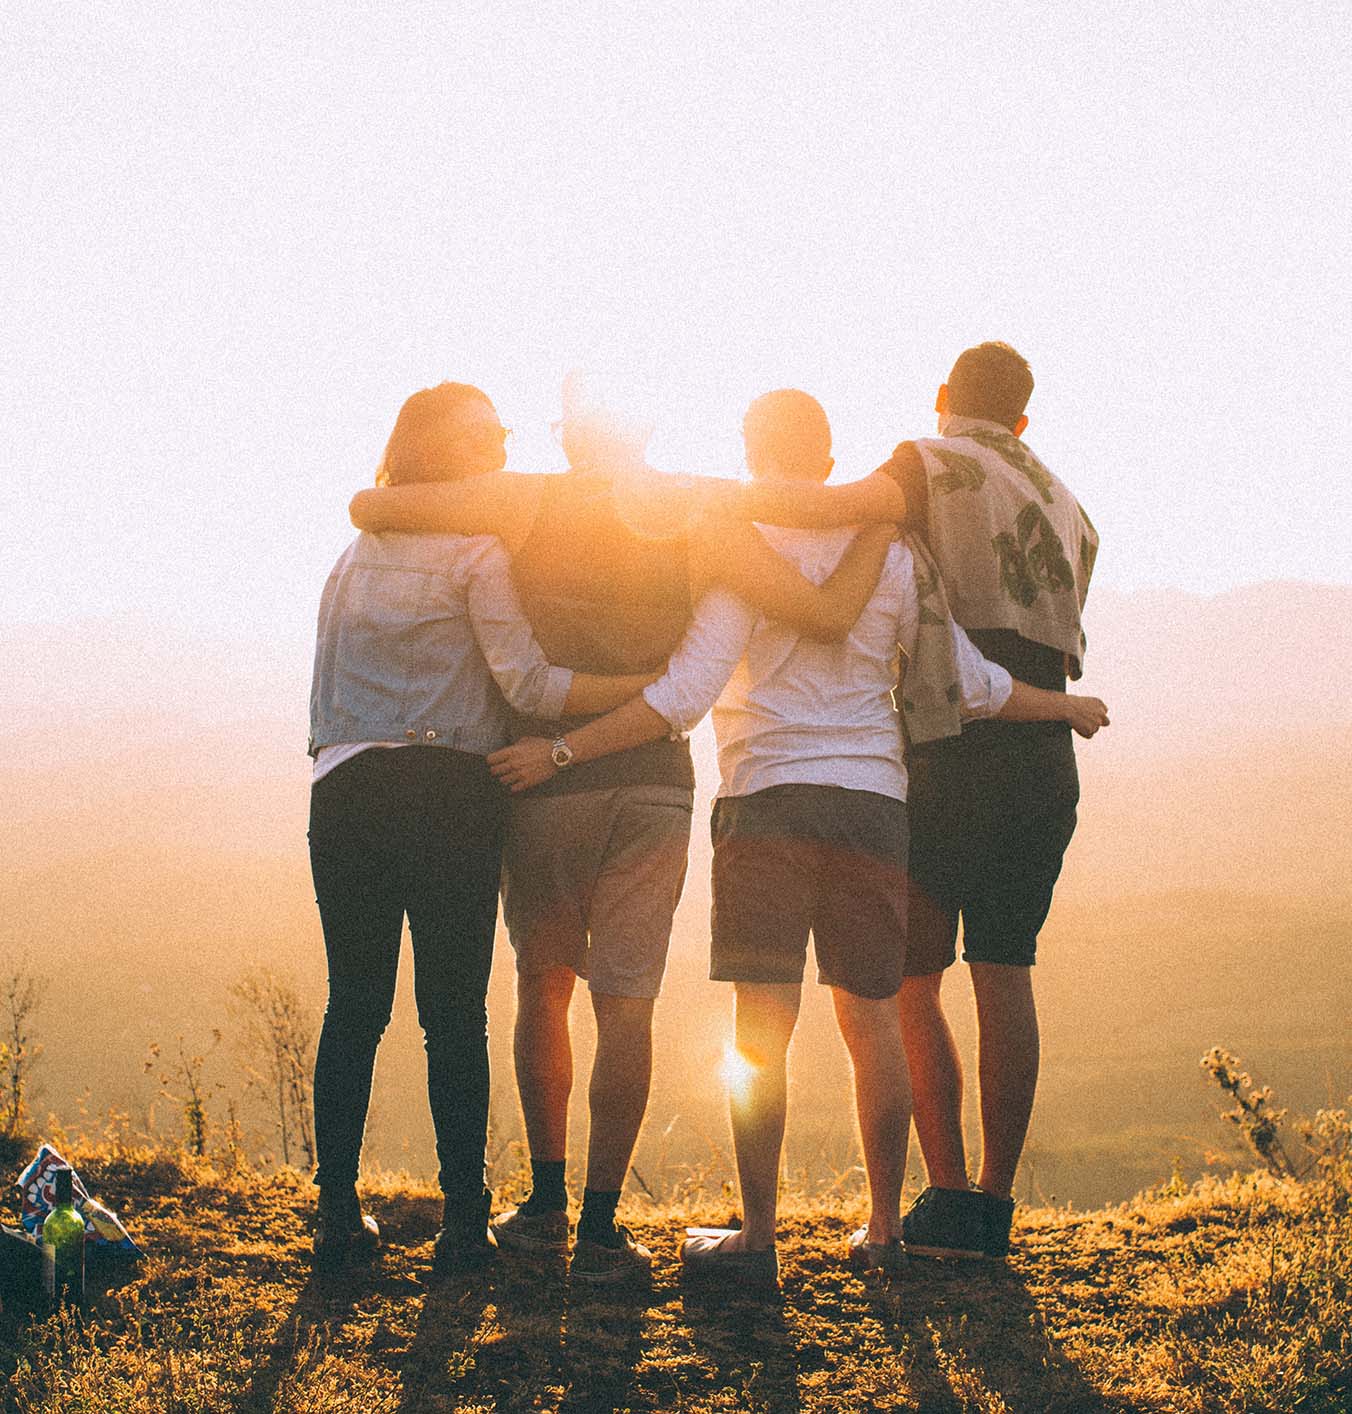 Why do we idolise ‘The One’? Friends are far more valuable